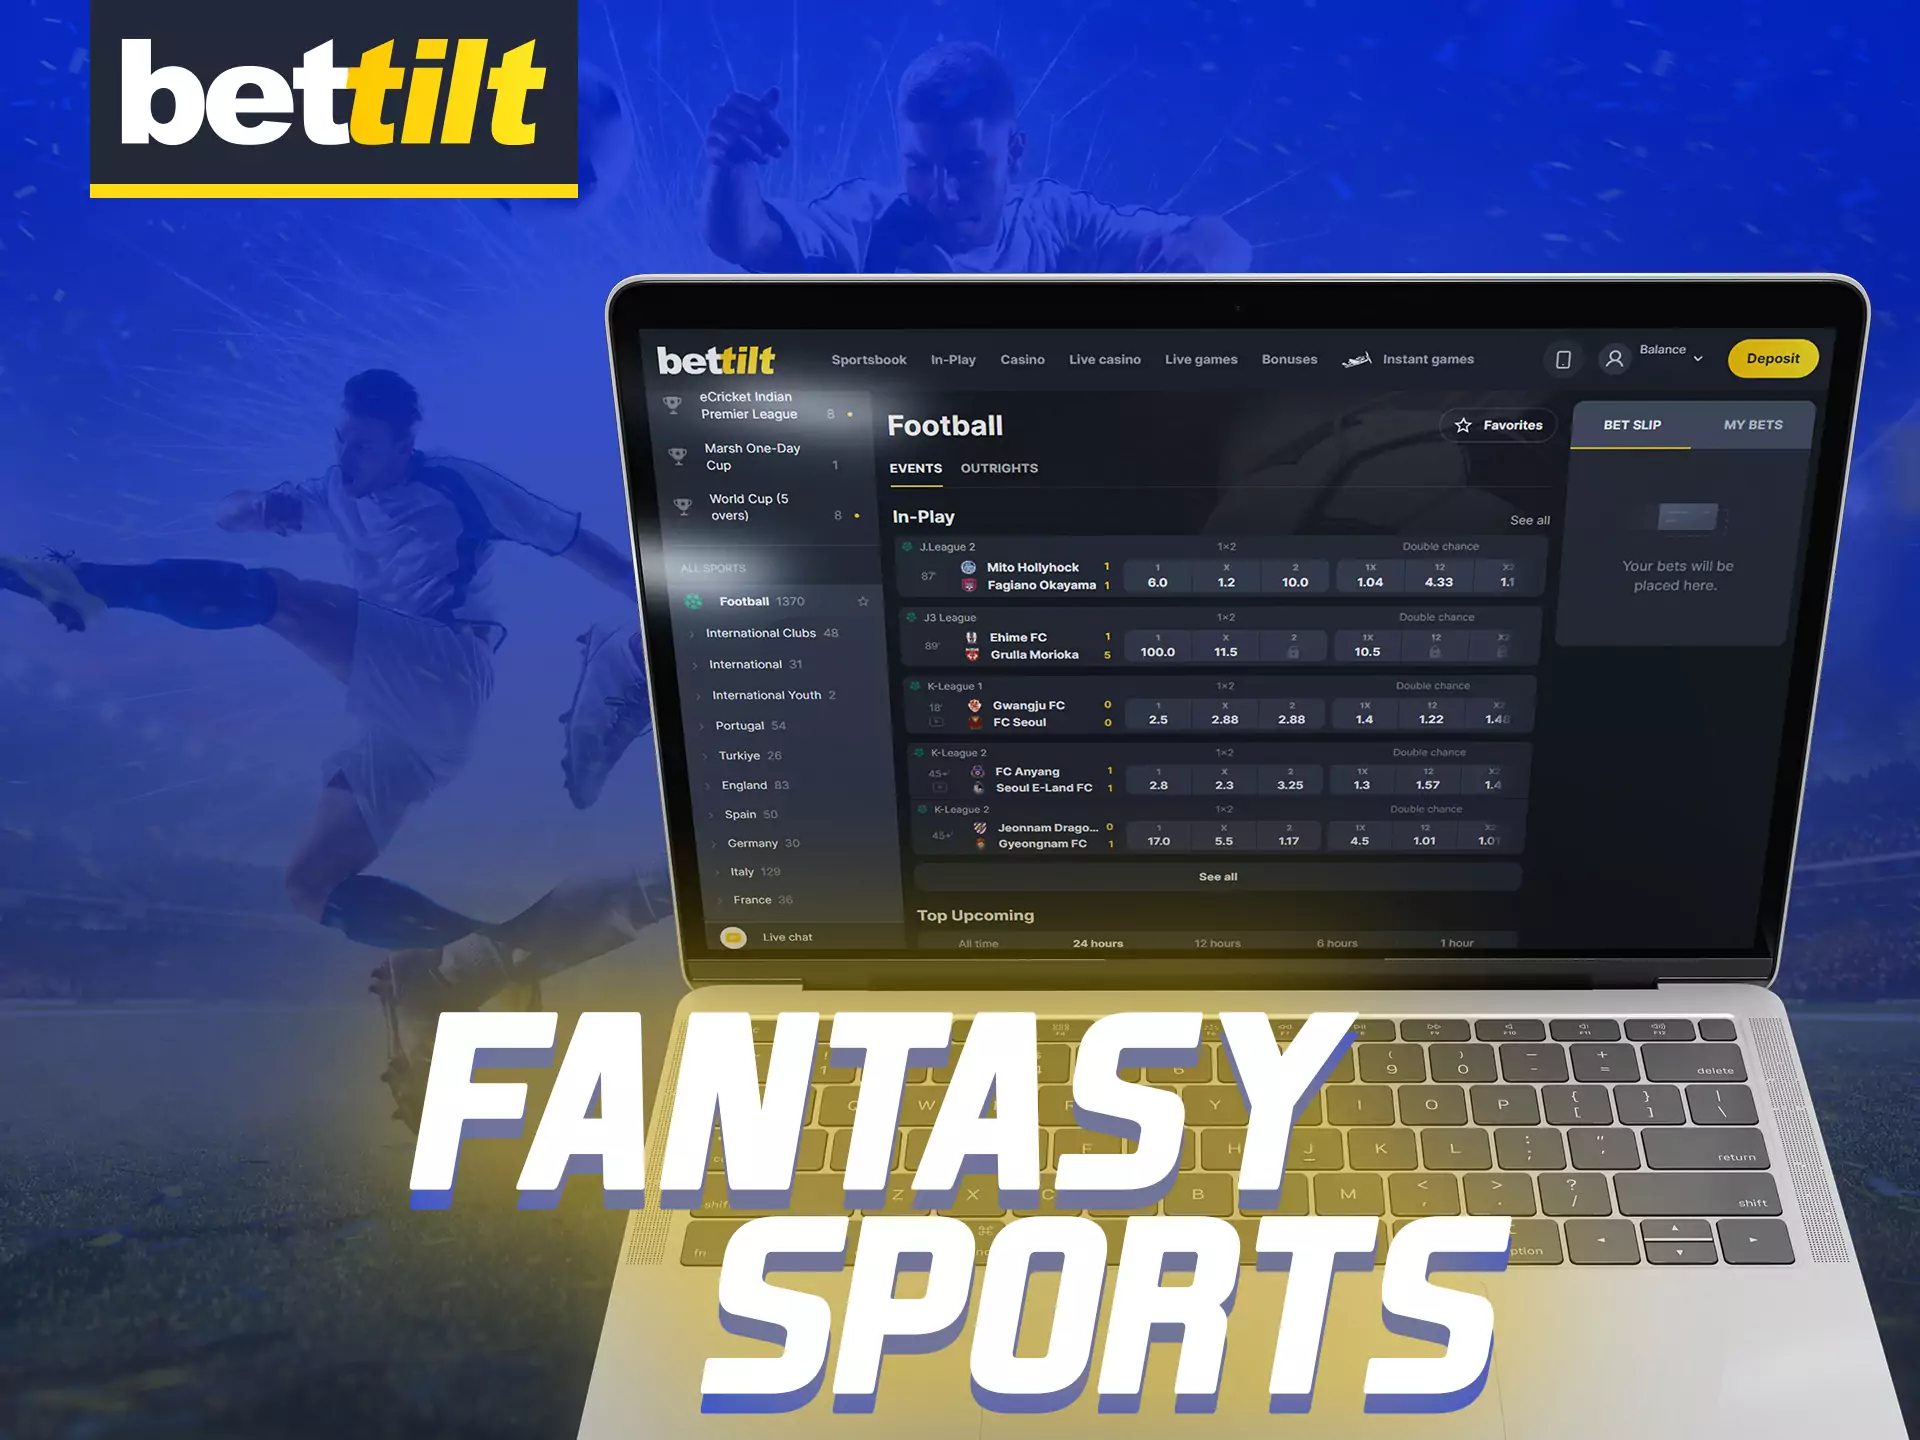 At Bettilt you have the opportunity to bet on fantasy sports.